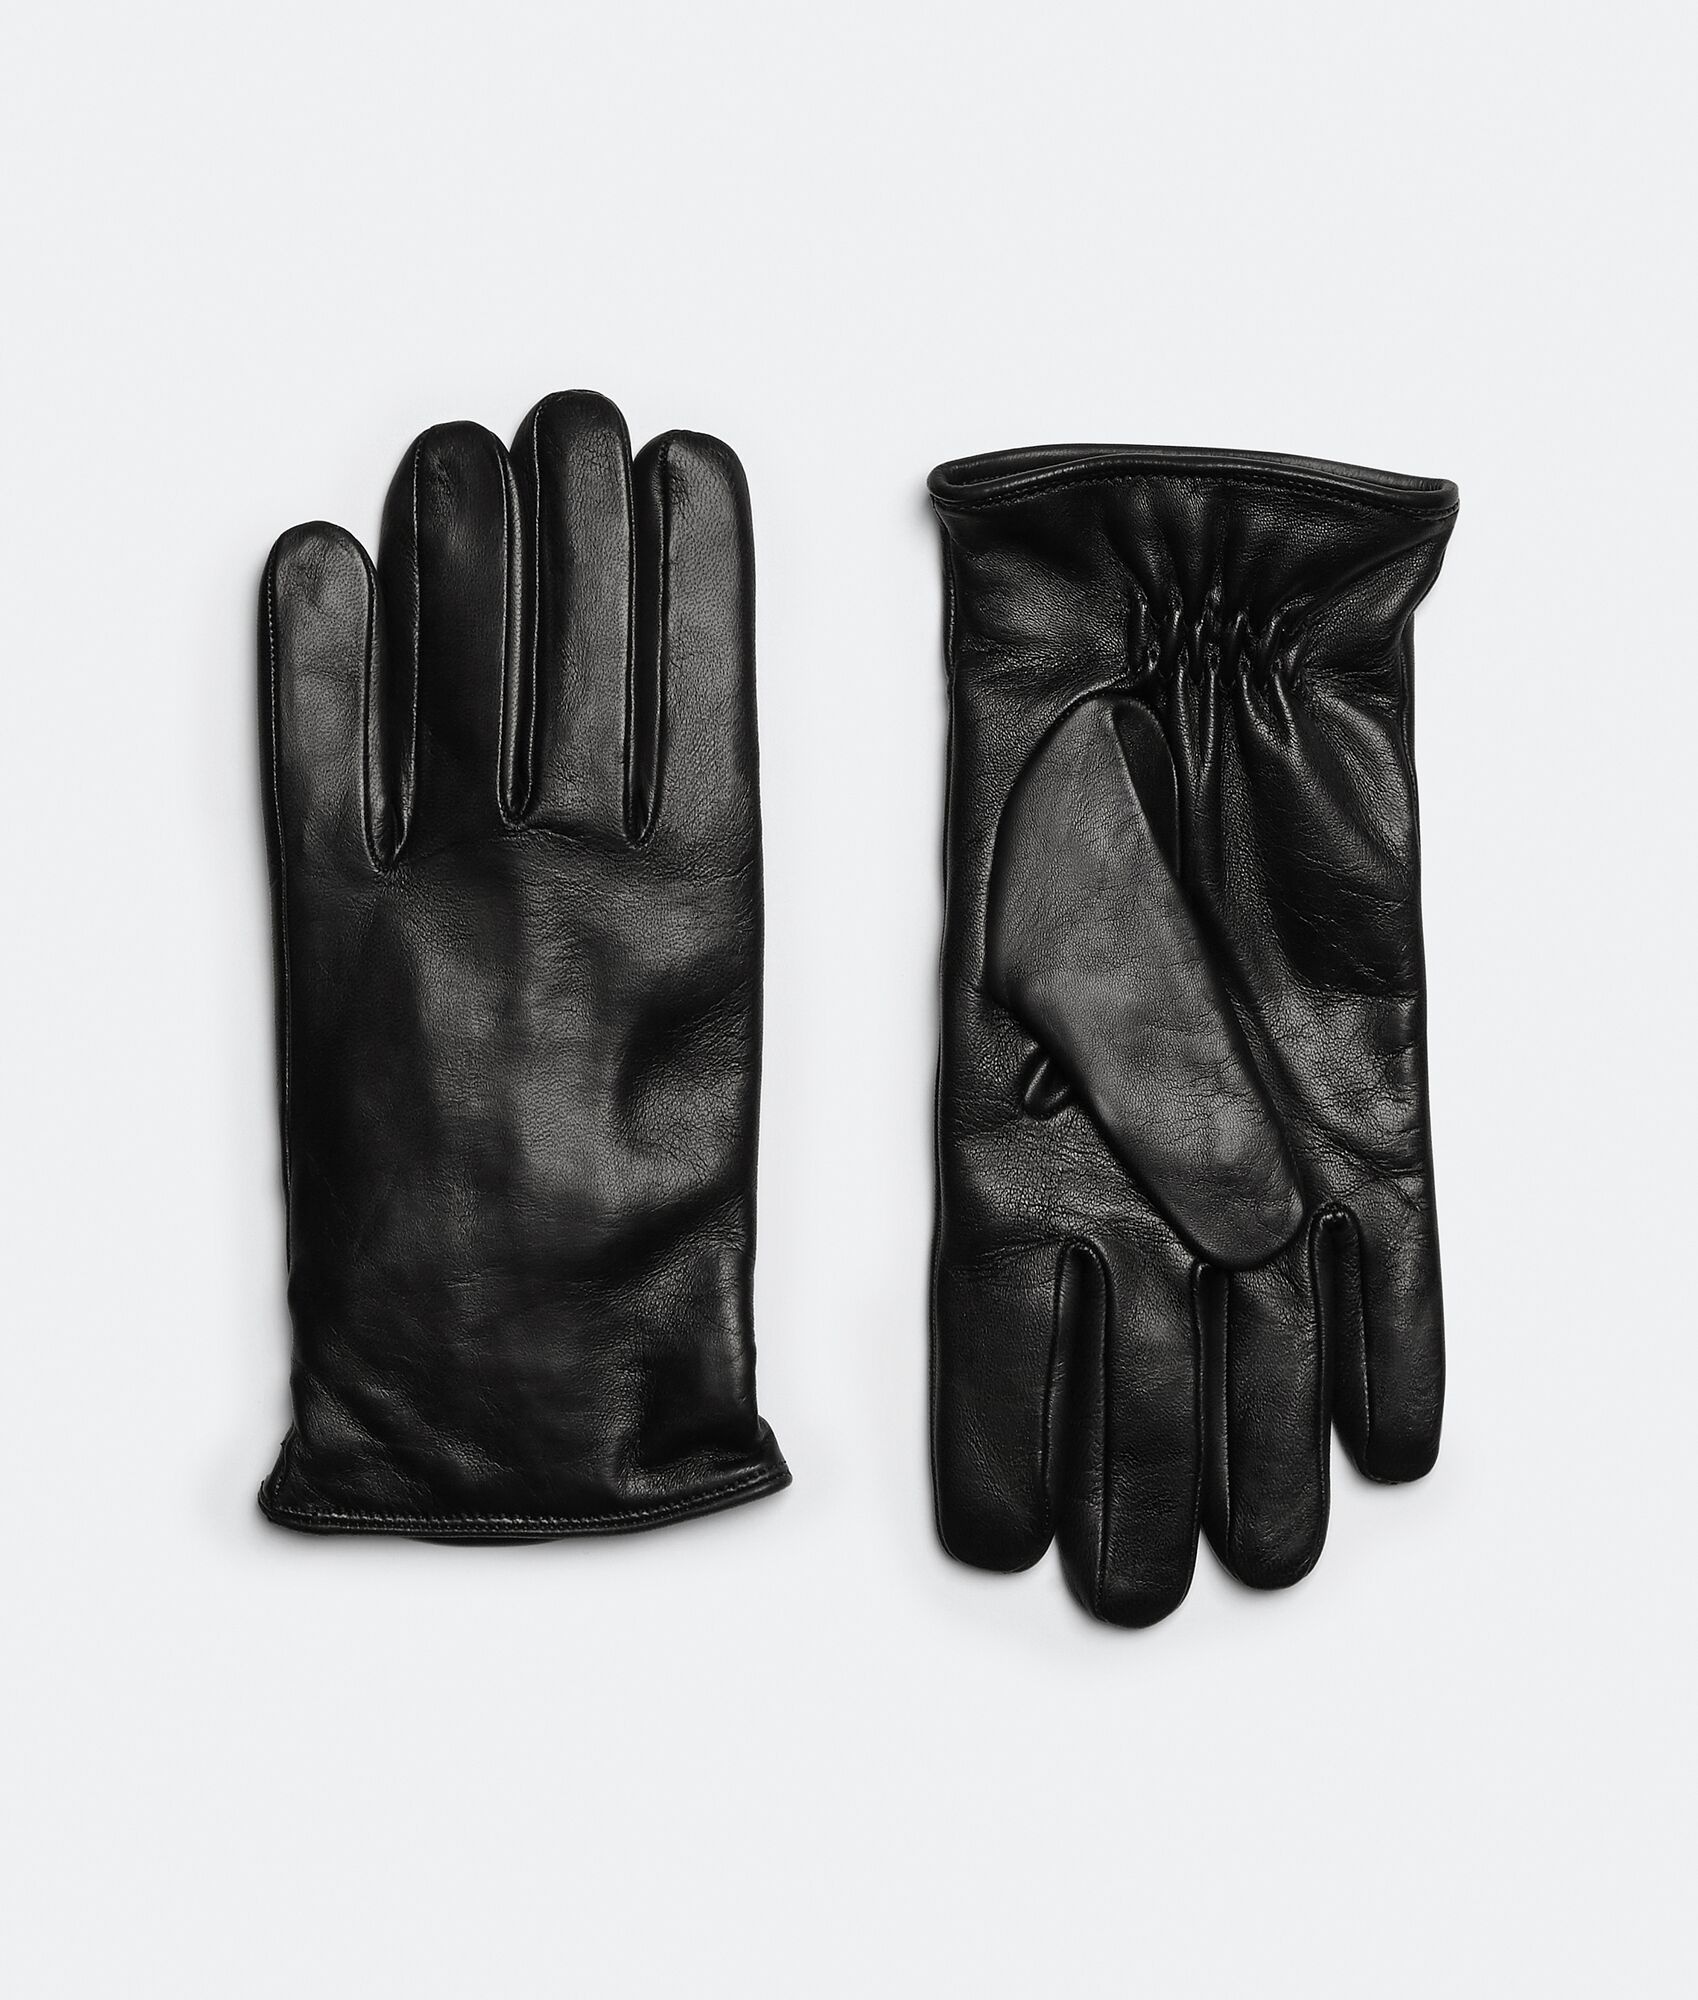 nappa leather gloves - 1